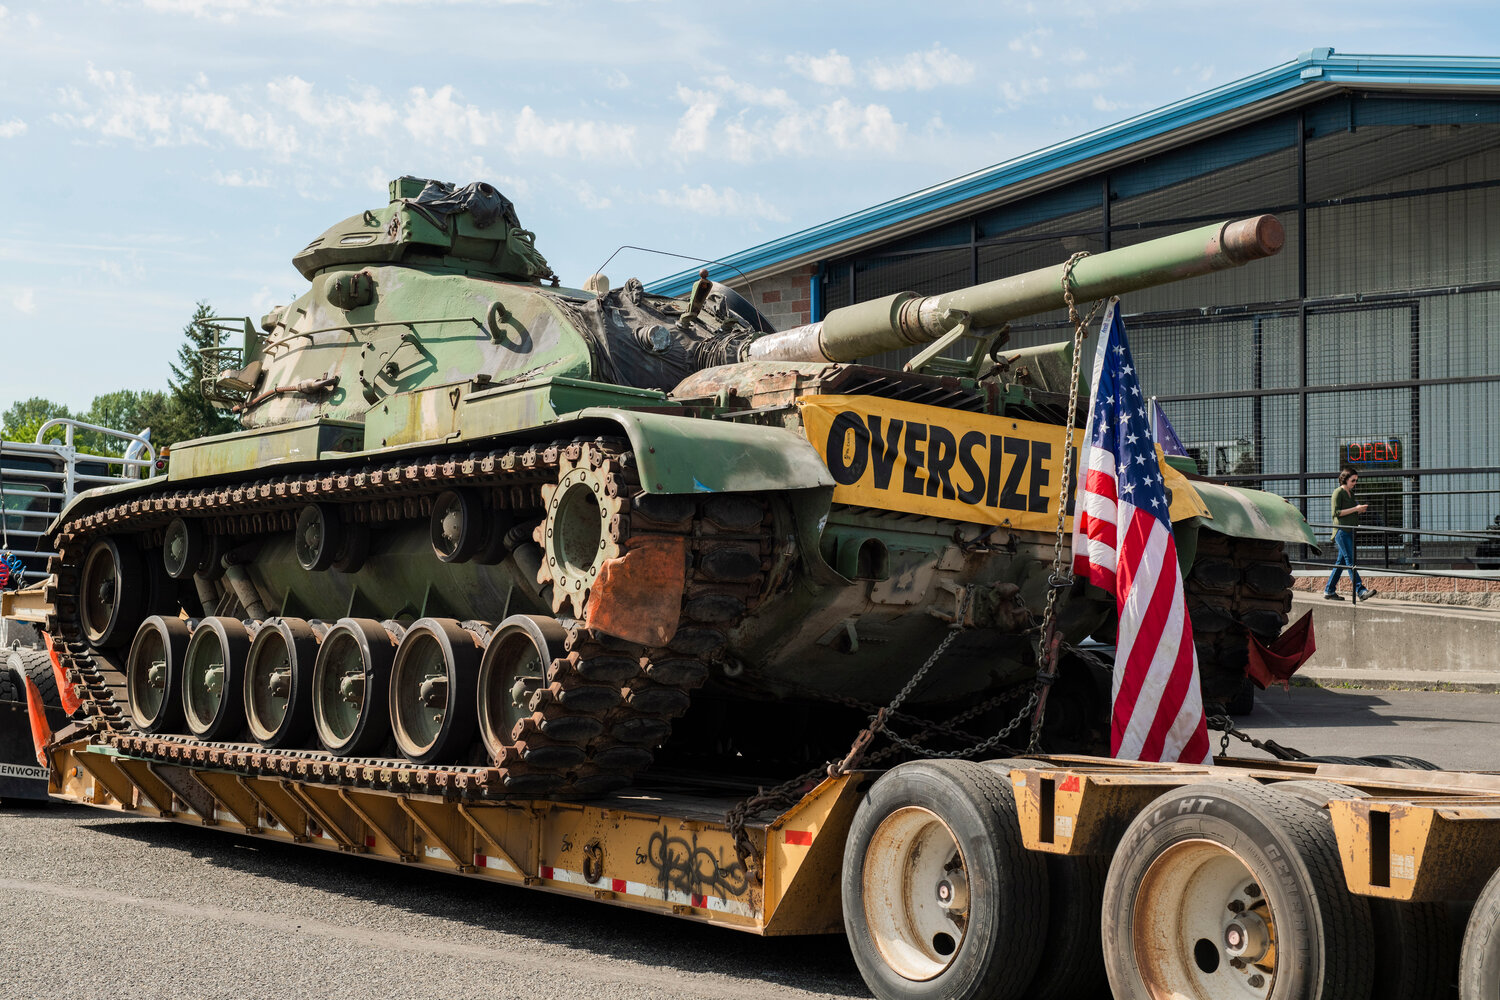 A flag hangs from a M60 tank as it is hauled into the parking lot of the Veterans Memorial Museum in Chehalis on Saturday, May 20.